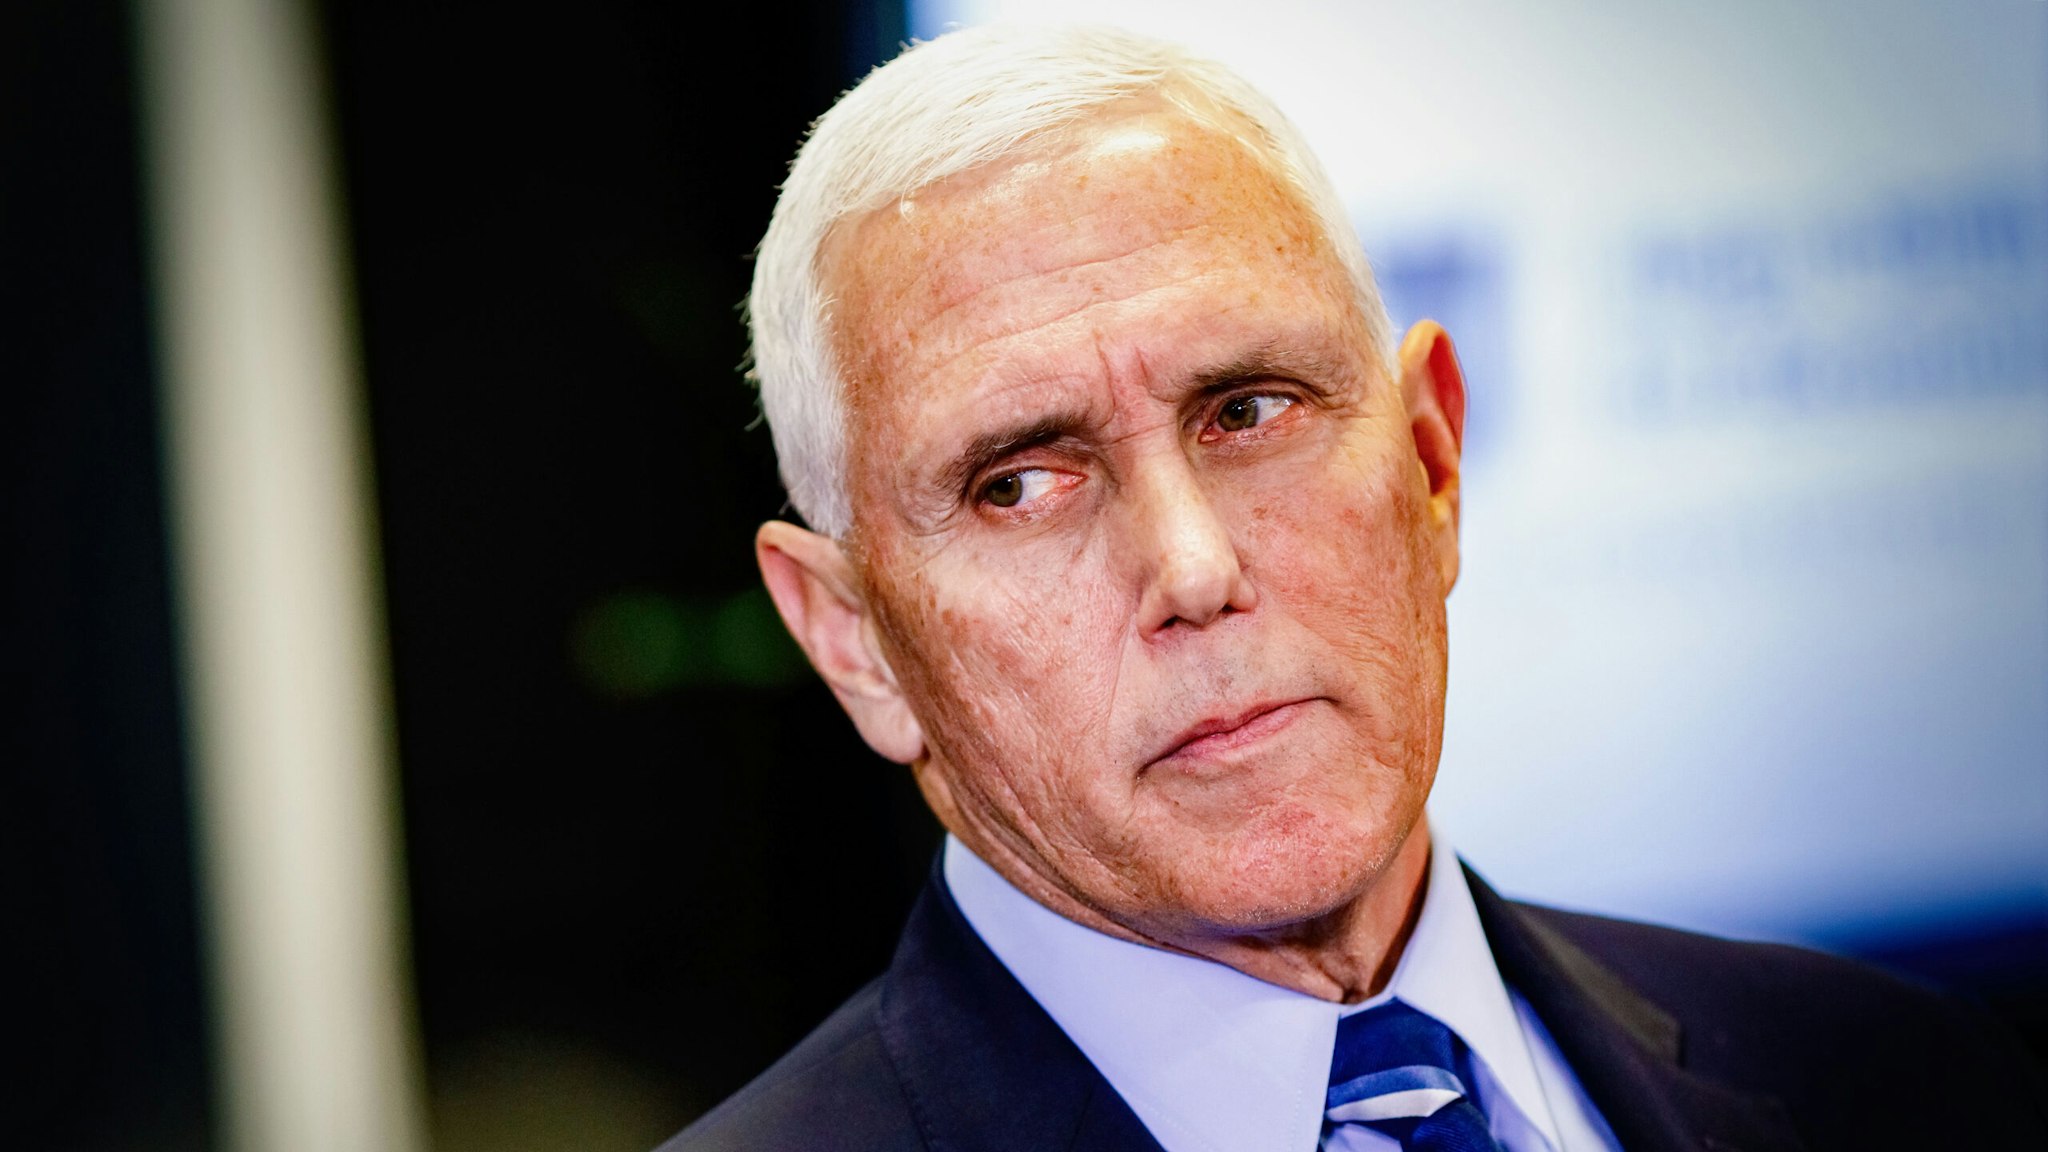 MIAMI, FL - JANUARY, 27: Former Vice President Mike Pence answers questions from the press during a visit to Florida International University (FIU) in Miami, Florida, as part of the book tour for his New York Times bestselling book, So Help Me God, on Friday, Jan. 27, 2023.